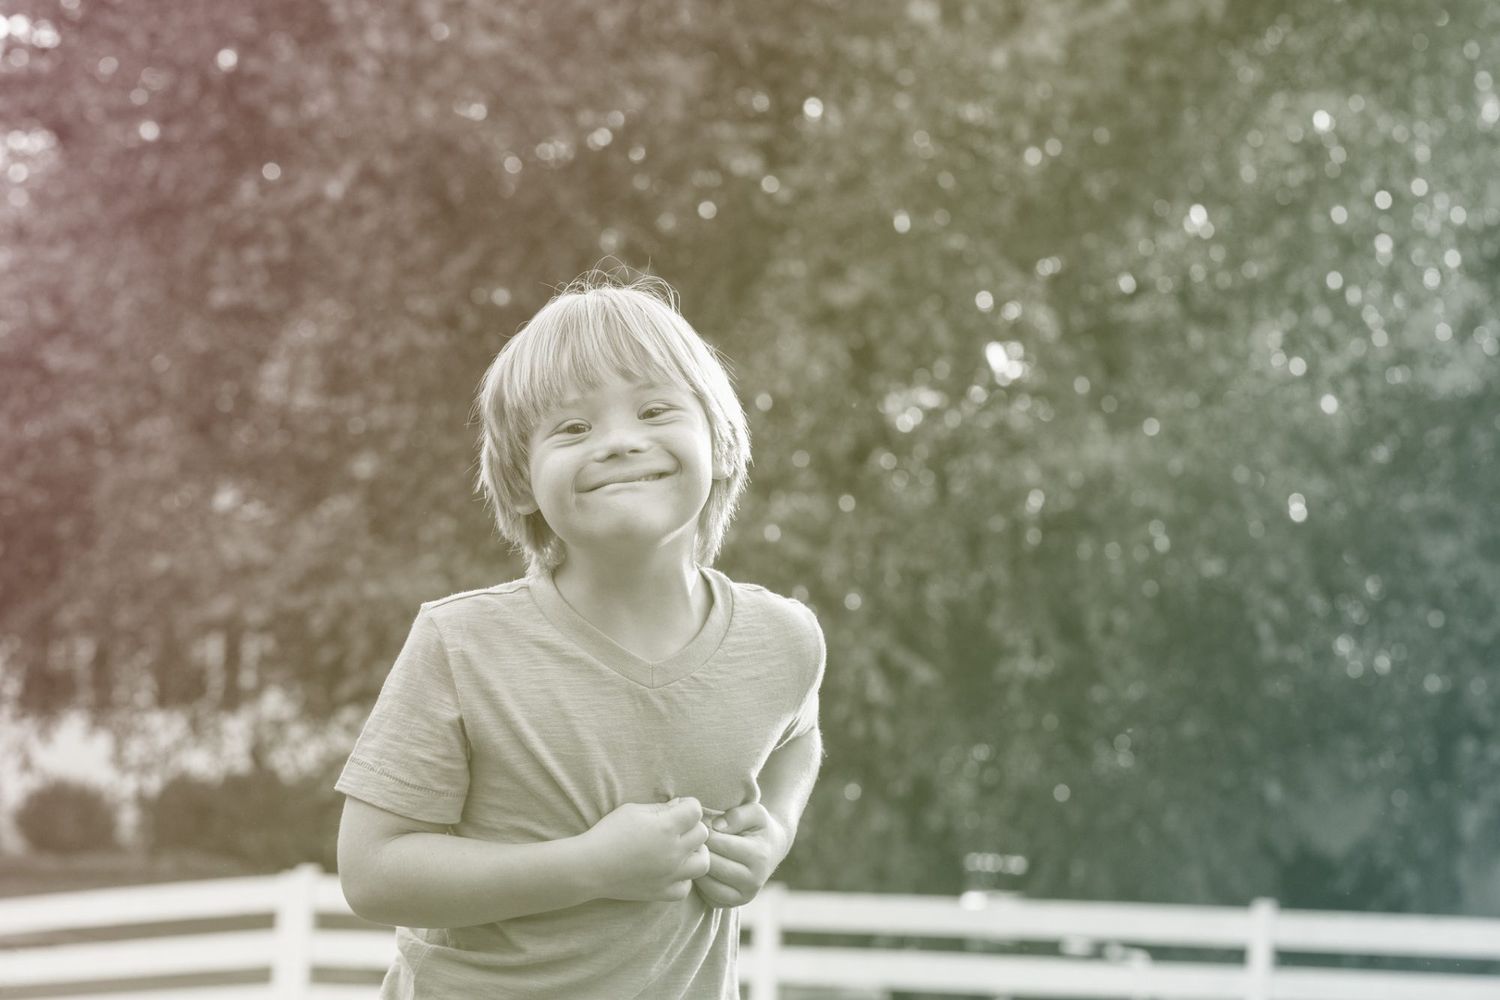 boy with Down Syndrome smiling outdoors